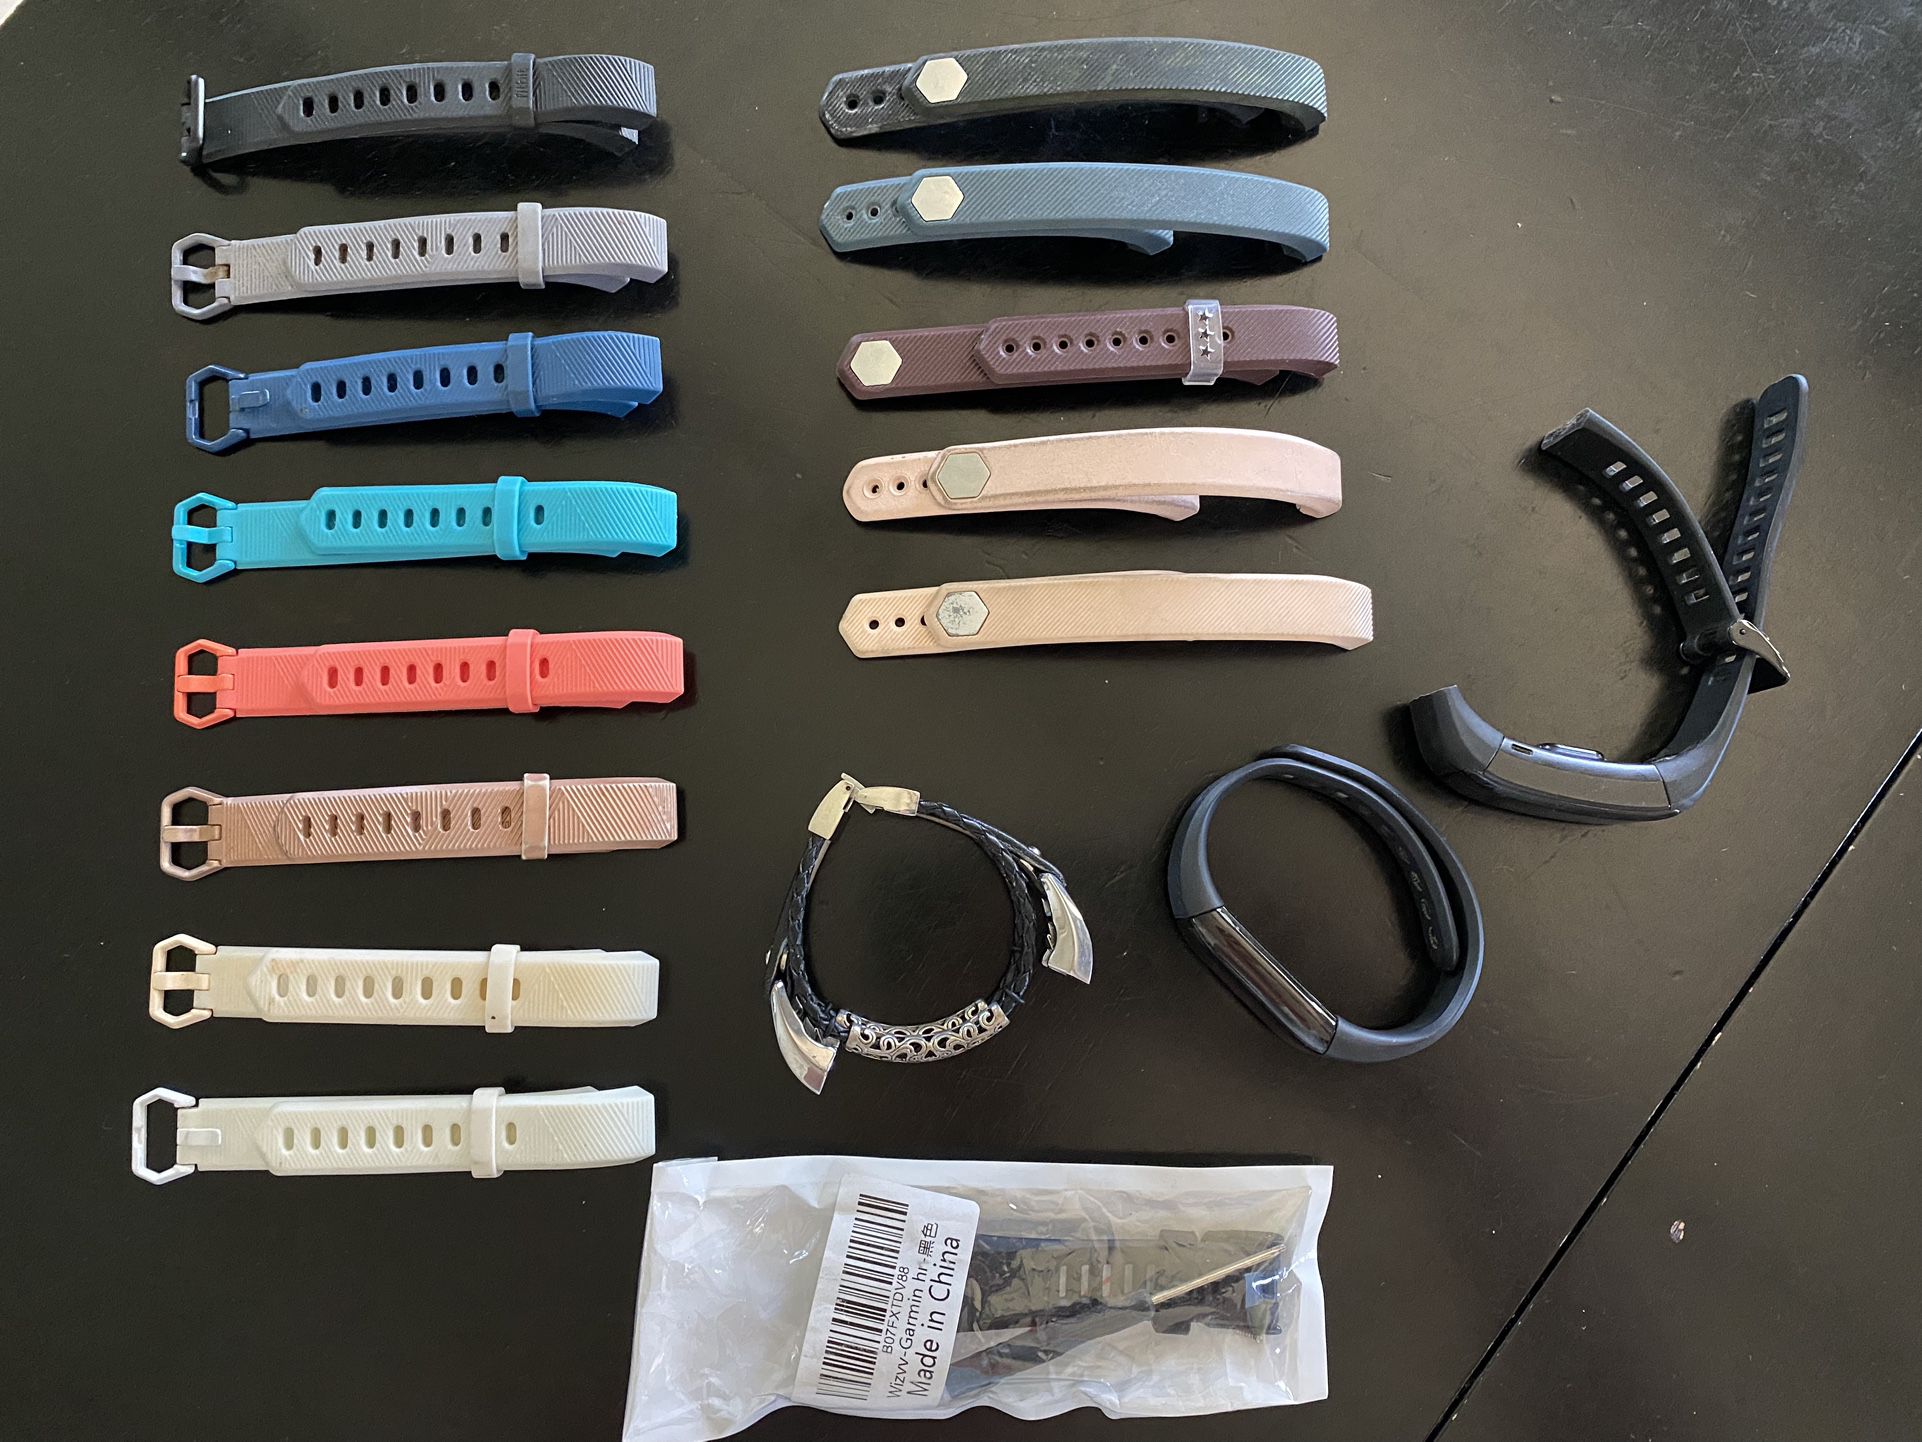 Fitbit Bands